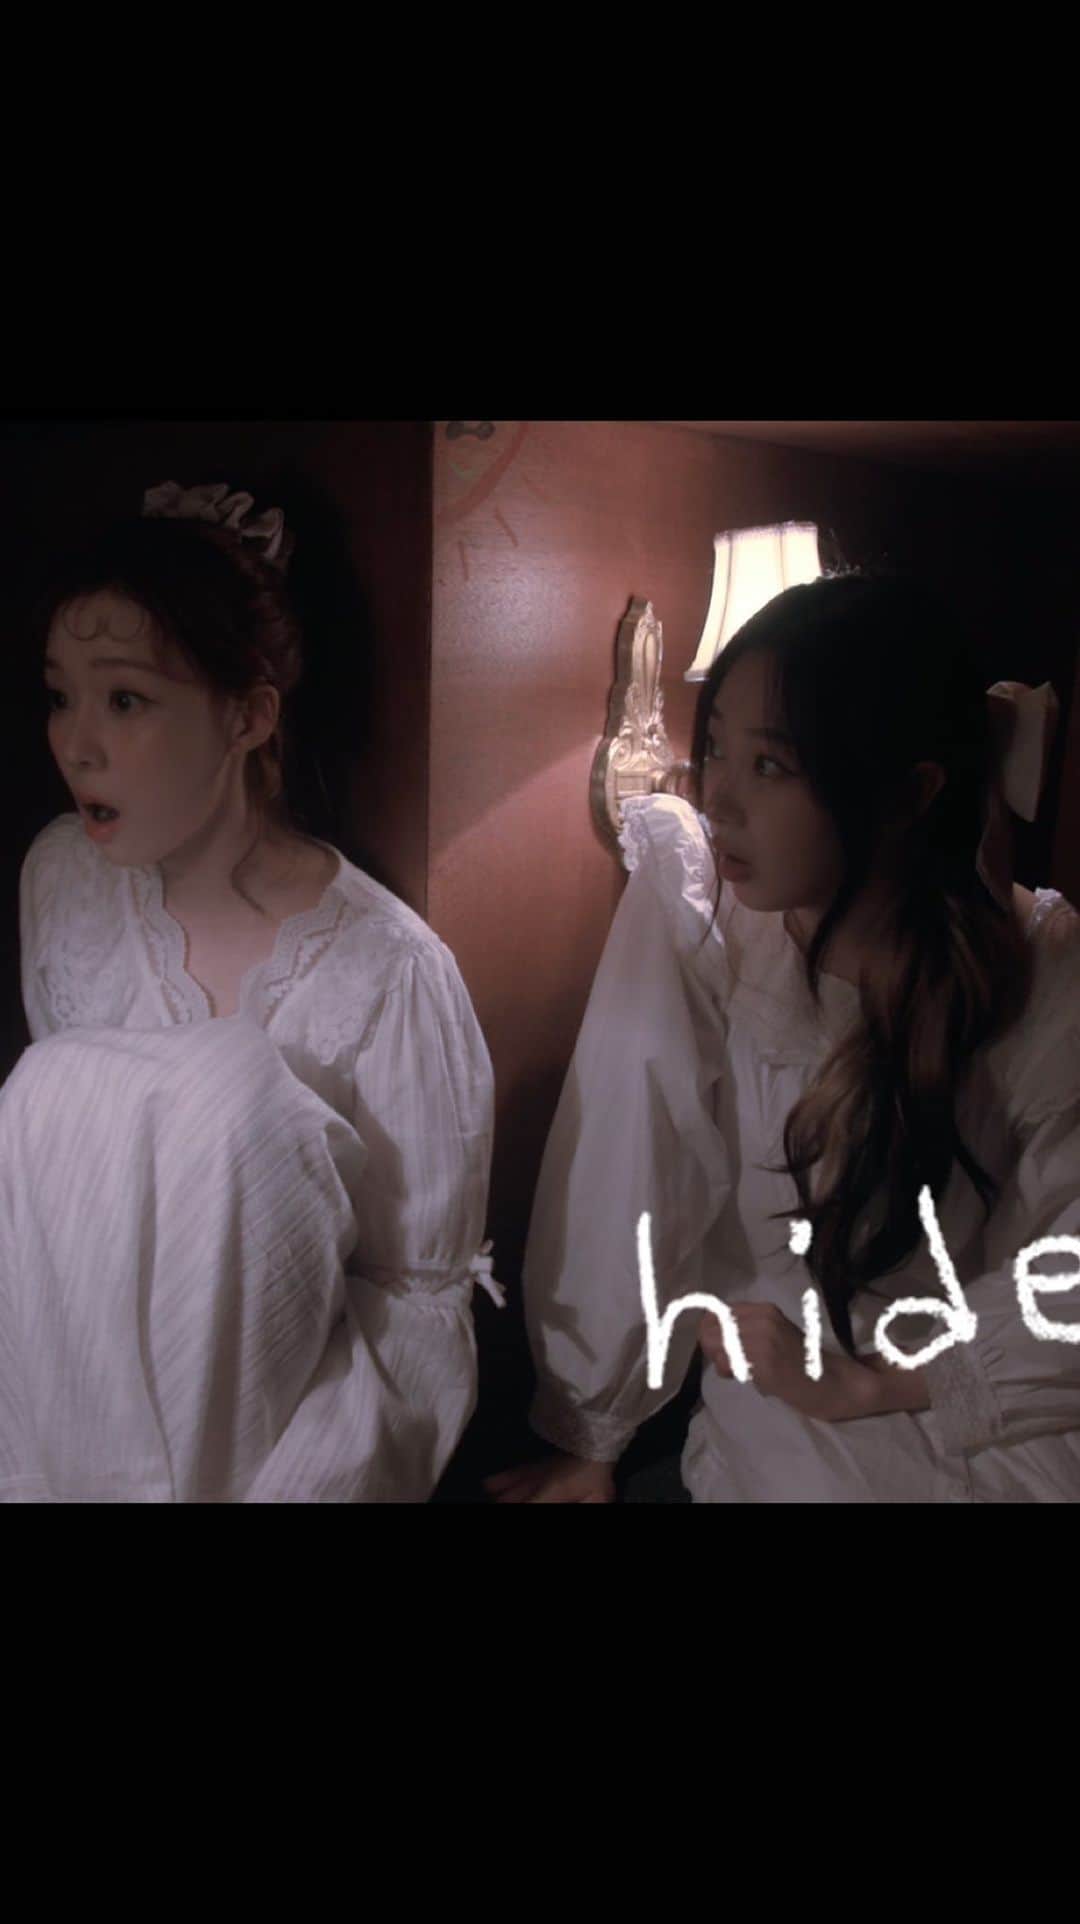 aespaのインスタグラム：「[EP 01. Preview] ‘Who visit the VILLA?’ - Hide and Seek | aespa 에스파 MYSTERY DRAMA ORIGINAL SERIES 📺   https://youtu.be/uNsEEy6lvAA   ‘Who visit the VILLA?’ Release Schedule 📍 aespa YouTube Channel EP 01. Hide and Seek: Nov 21 10PM(KST) EP 02. Who are you?: Nov 23 10PM(KST) EP 03. Cruel Audition: Nov 25 10PM(KST)   #aespa #æspa #에스파 #Drama #aespaDrama #WhovisittheVILLA #aespaORIGINALSERIES #HideandSeek #Whoareyou #CruelAudition」